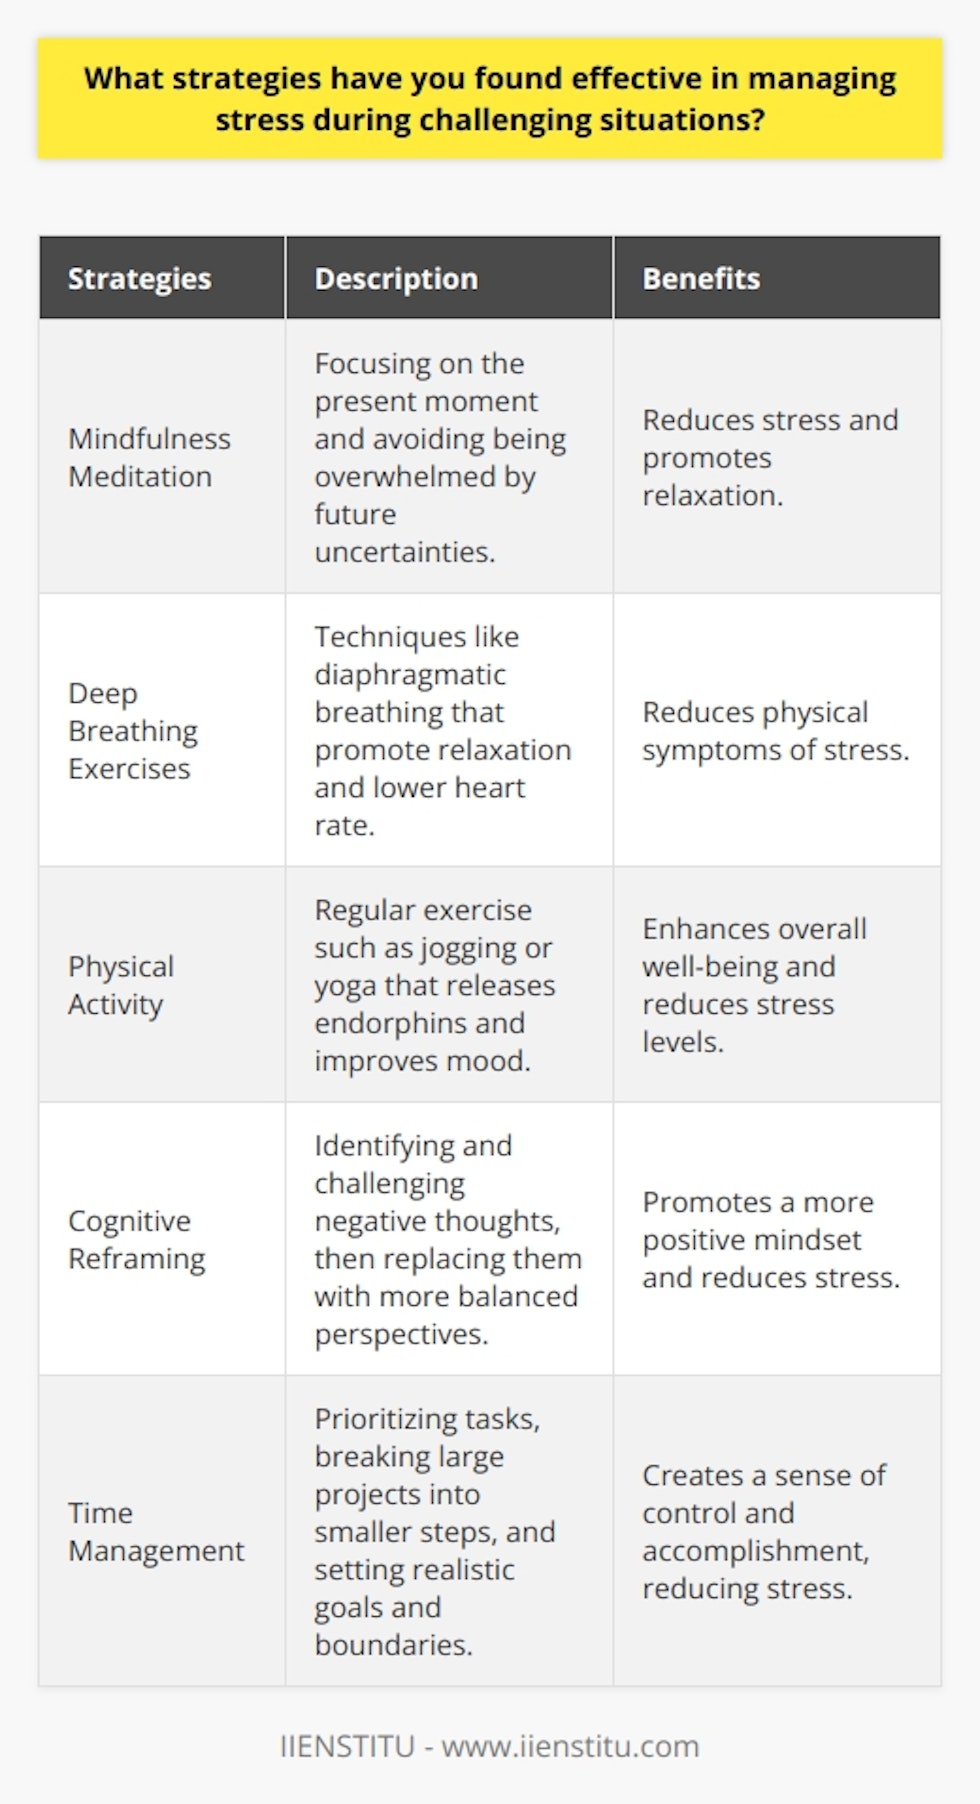 Effective stress management strategies during challenging situations involve a combination of mental, physical, and social approaches. One crucial technique is practicing mindfulness meditation, which helps individuals focus on the present moment and avoid getting overwhelmed by future uncertainties. Deep breathing exercises, such as diaphragmatic breathing, can also reduce stress by promoting relaxation and lowering heart rate. Additionally, engaging in regular physical activity, like jogging or yoga, releases endorphins and improves overall mood. Cognitive Reframing and Time Management Cognitive reframing is another powerful tool for managing stress in difficult times. This involves identifying and challenging negative thoughts, then replacing them with more balanced, positive perspectives. Effective time management skills, such as prioritizing tasks and breaking large projects into smaller, manageable steps, can help reduce stress by creating a sense of control and accomplishment. Setting realistic goals and boundaries, both personally and professionally, is also essential for maintaining a healthy work-life balance. Social Support and Self-Care Seeking social support from friends, family, or a professional therapist can provide a valuable outlet for expressing emotions and gaining new perspectives. Engaging in hobbies and leisure activities, such as reading, gardening, or playing music, can serve as a distraction from stressors and promote relaxation. Maintaining a healthy lifestyle through proper nutrition, hydration, and sufficient sleep is crucial for building resilience against stress. Flexibility and Adaptability Cultivating flexibility and adaptability is essential for coping with unexpected challenges. Embracing change and viewing obstacles as opportunities for growth can help reframe stressful situations in a more positive light. Practicing gratitude and focusing on the things one can control, rather than dwelling on what cannot be changed, can also foster a more resilient mindset. Continuous Learning and Self-Reflection Continuously learning and developing new coping strategies can enhance ones stress management toolkit. Attending workshops, reading self-help books, or learning relaxation techniques like progressive muscle relaxation can provide new insights and skills. Regular self-reflection through journaling or discussing experiences with a trusted confidant can help identify triggers and patterns, enabling individuals to make necessary adjustments to their stress management approach. By incorporating a diverse range of strategies, including mindfulness, physical activity, cognitive reframing, social support, and self-care, individuals can effectively manage stress during challenging situations. Remembering to be patient, flexible, and kind to oneself is essential, as developing resilience is an ongoing process that requires practice and persistence.